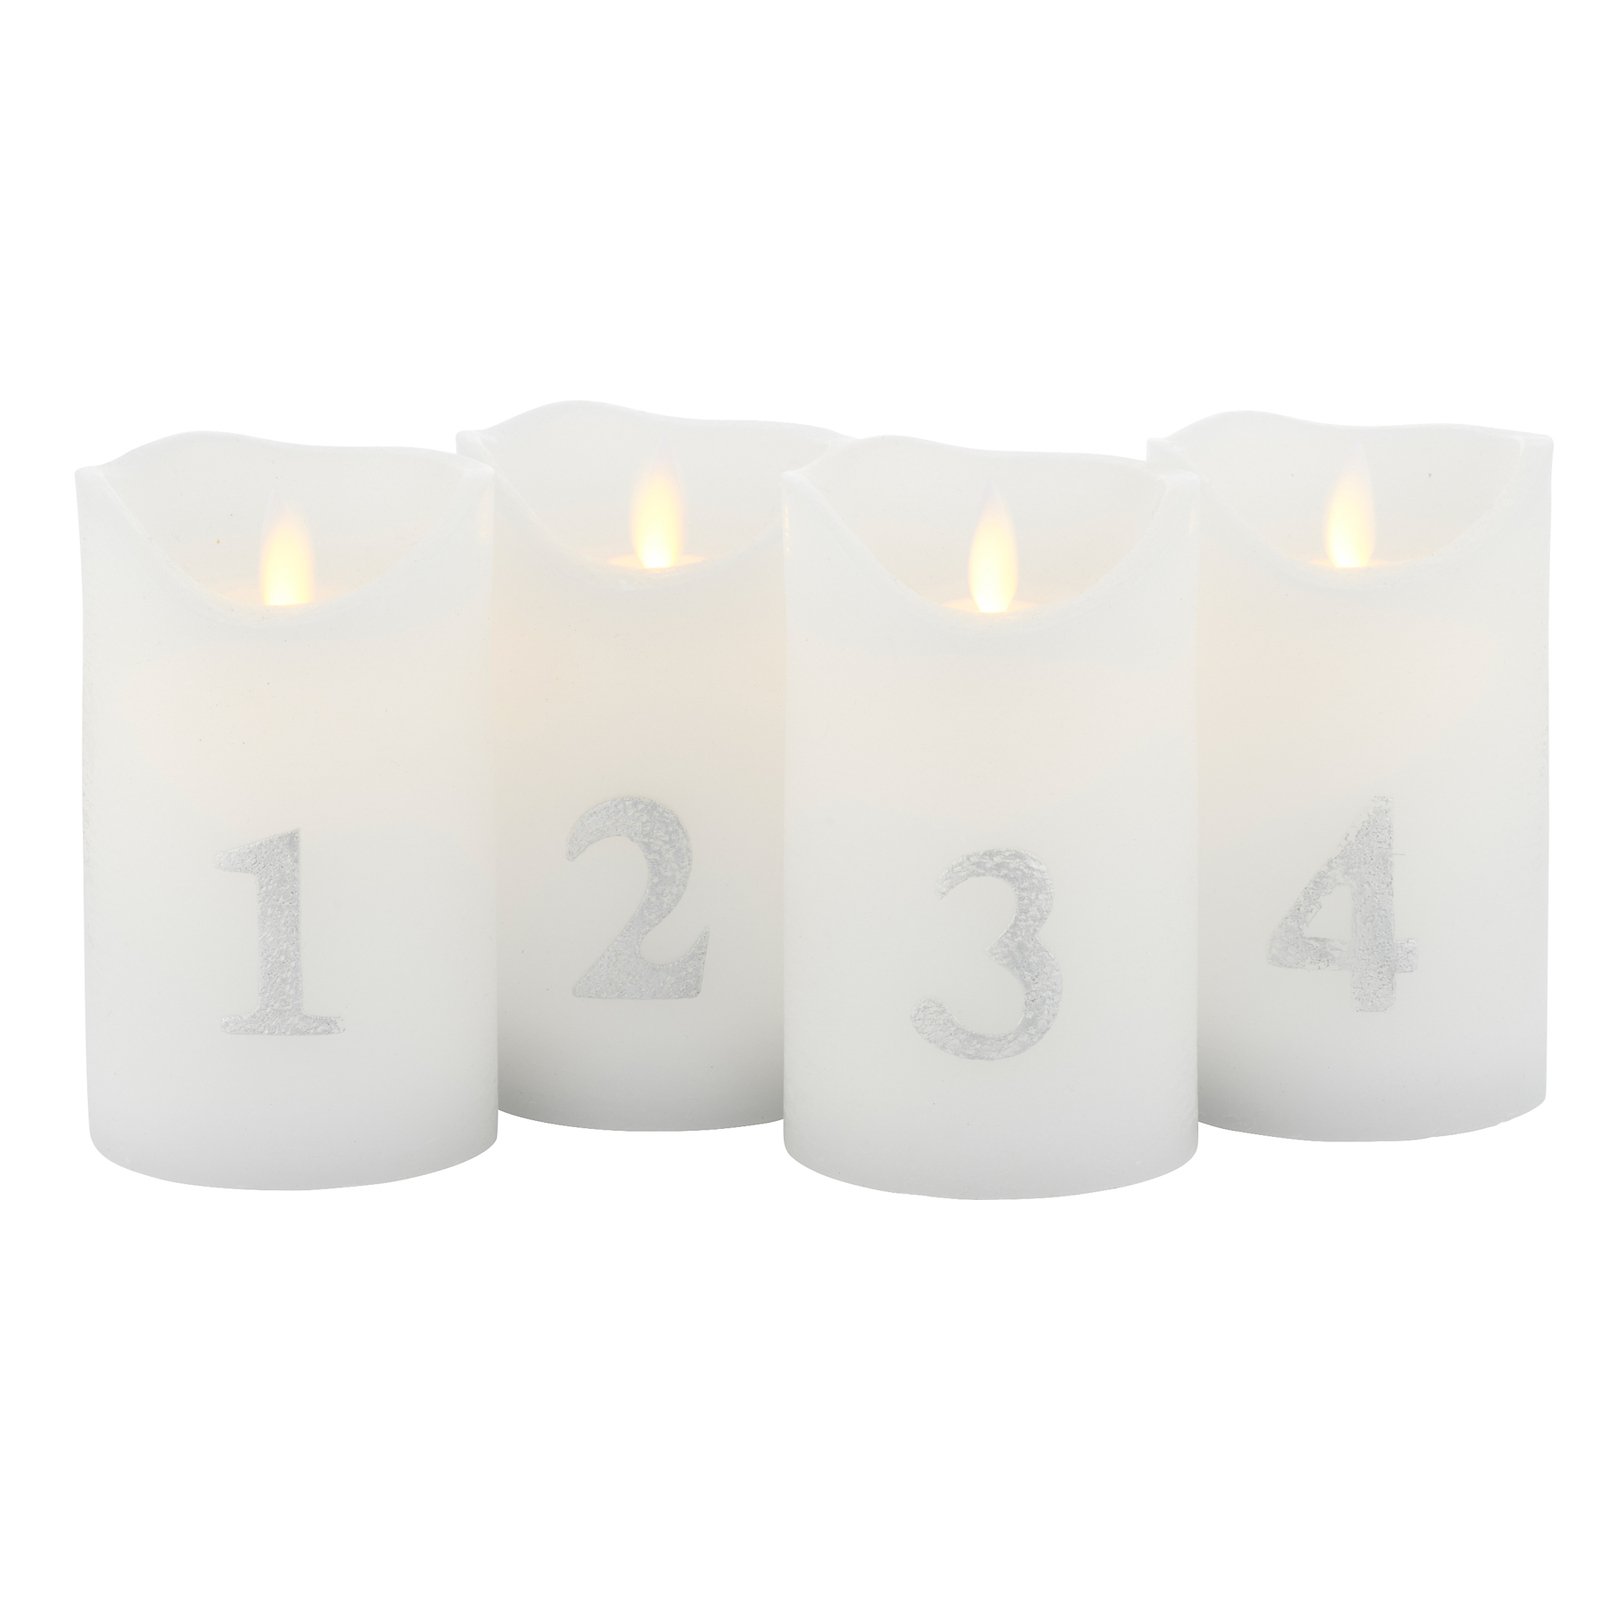 LED candle Sara Advent 4pcs height 12.5cm white/silver